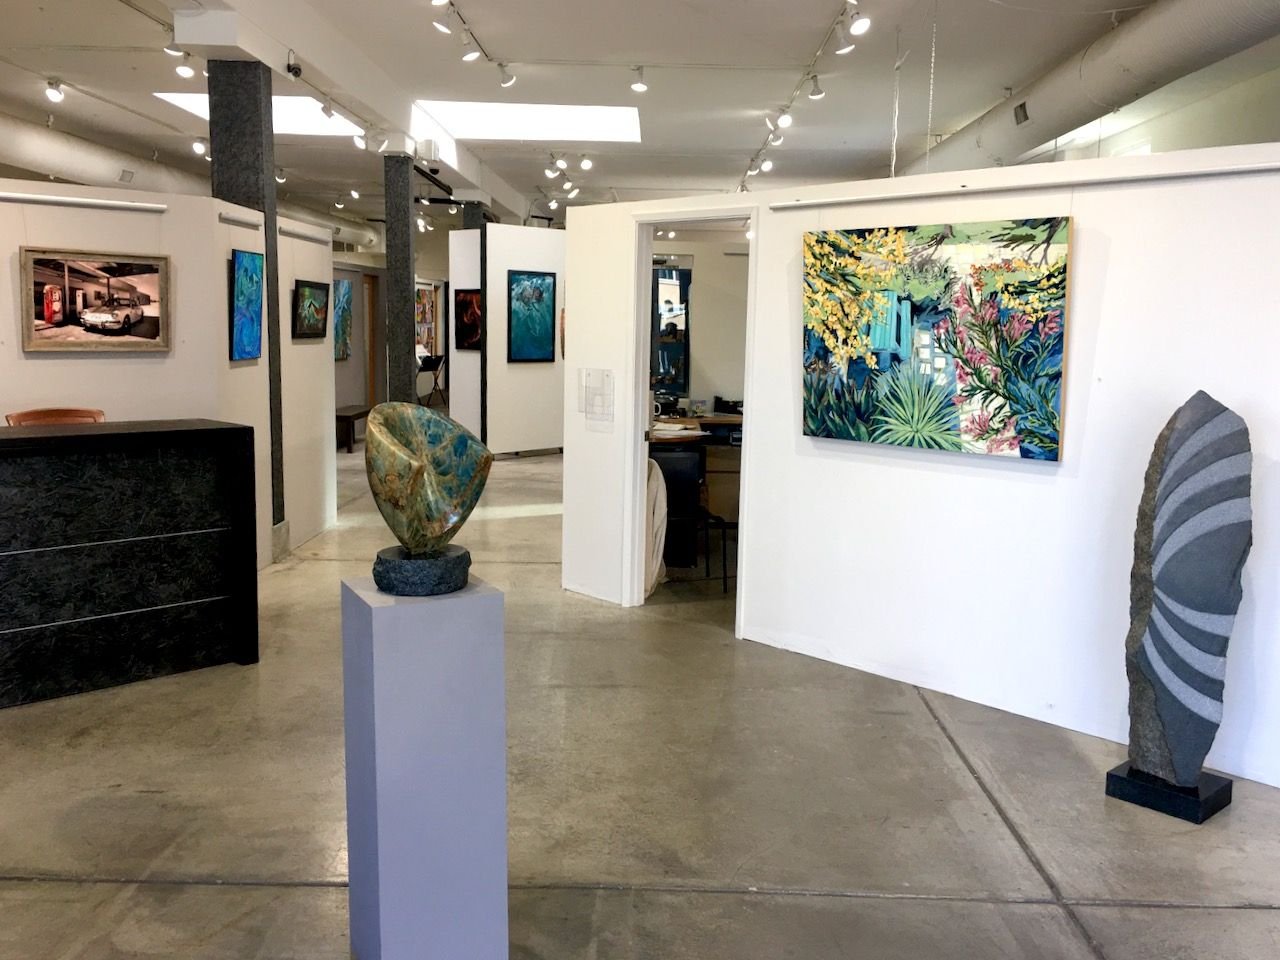 Interior of The Studio Door art gallery in Hillcrest, San Diego featuring sculptures and paintings 